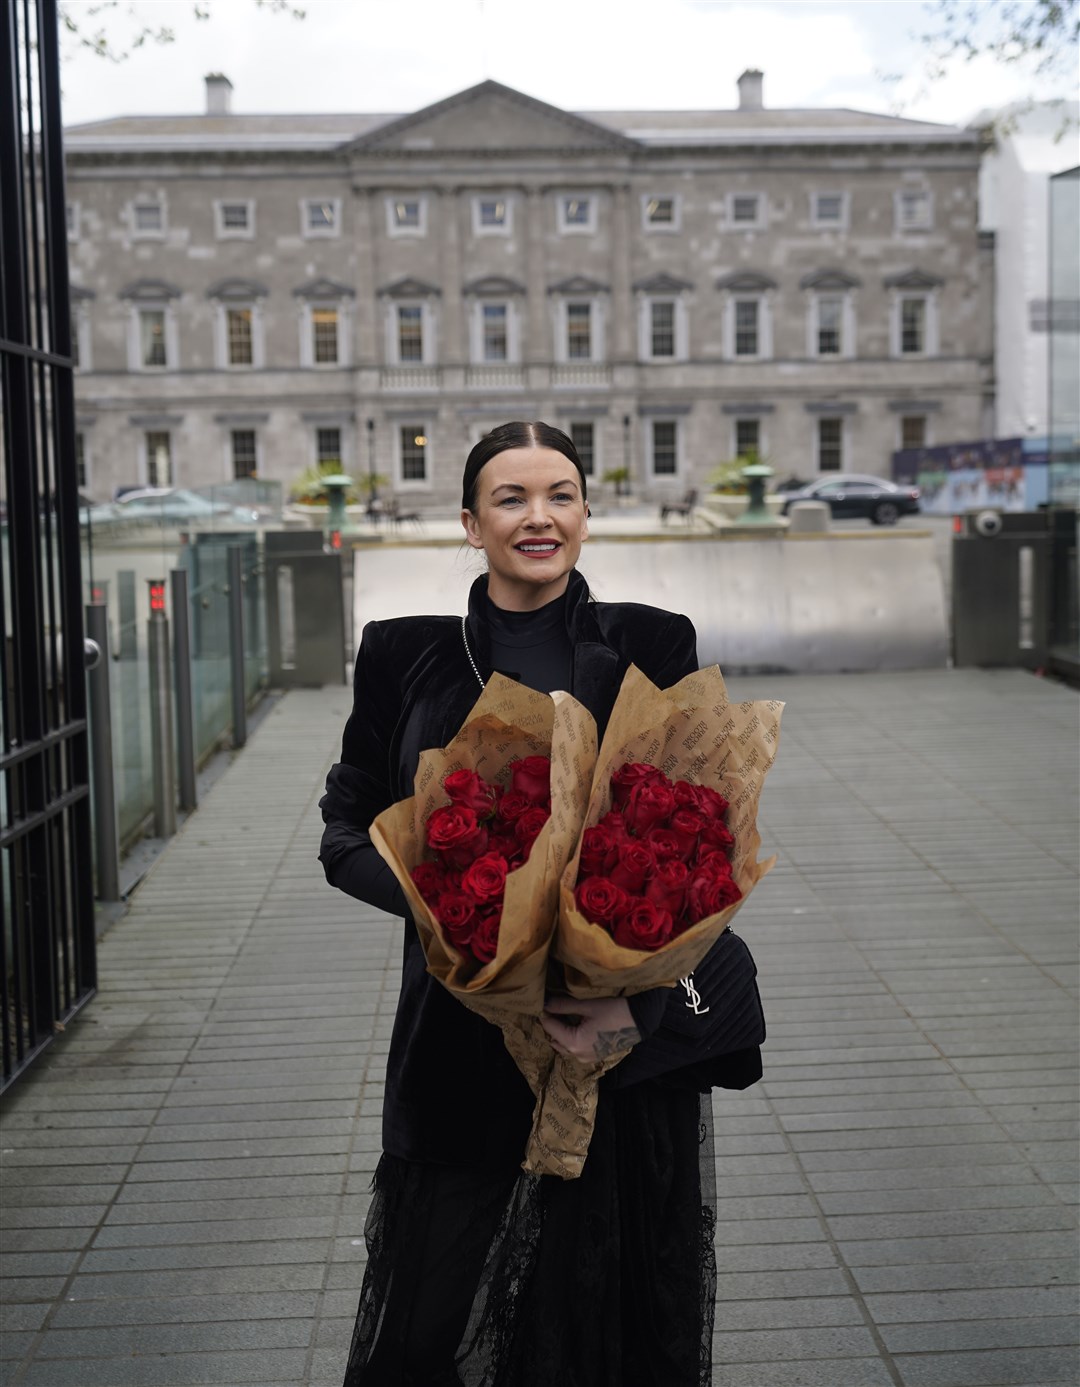 Lisa Lawlor, who was 17 months old when her parents Francis and Maureen Lawlor died in the Stardust fire, arrives at Leinster House, Dublin (Niall Carson/PA)